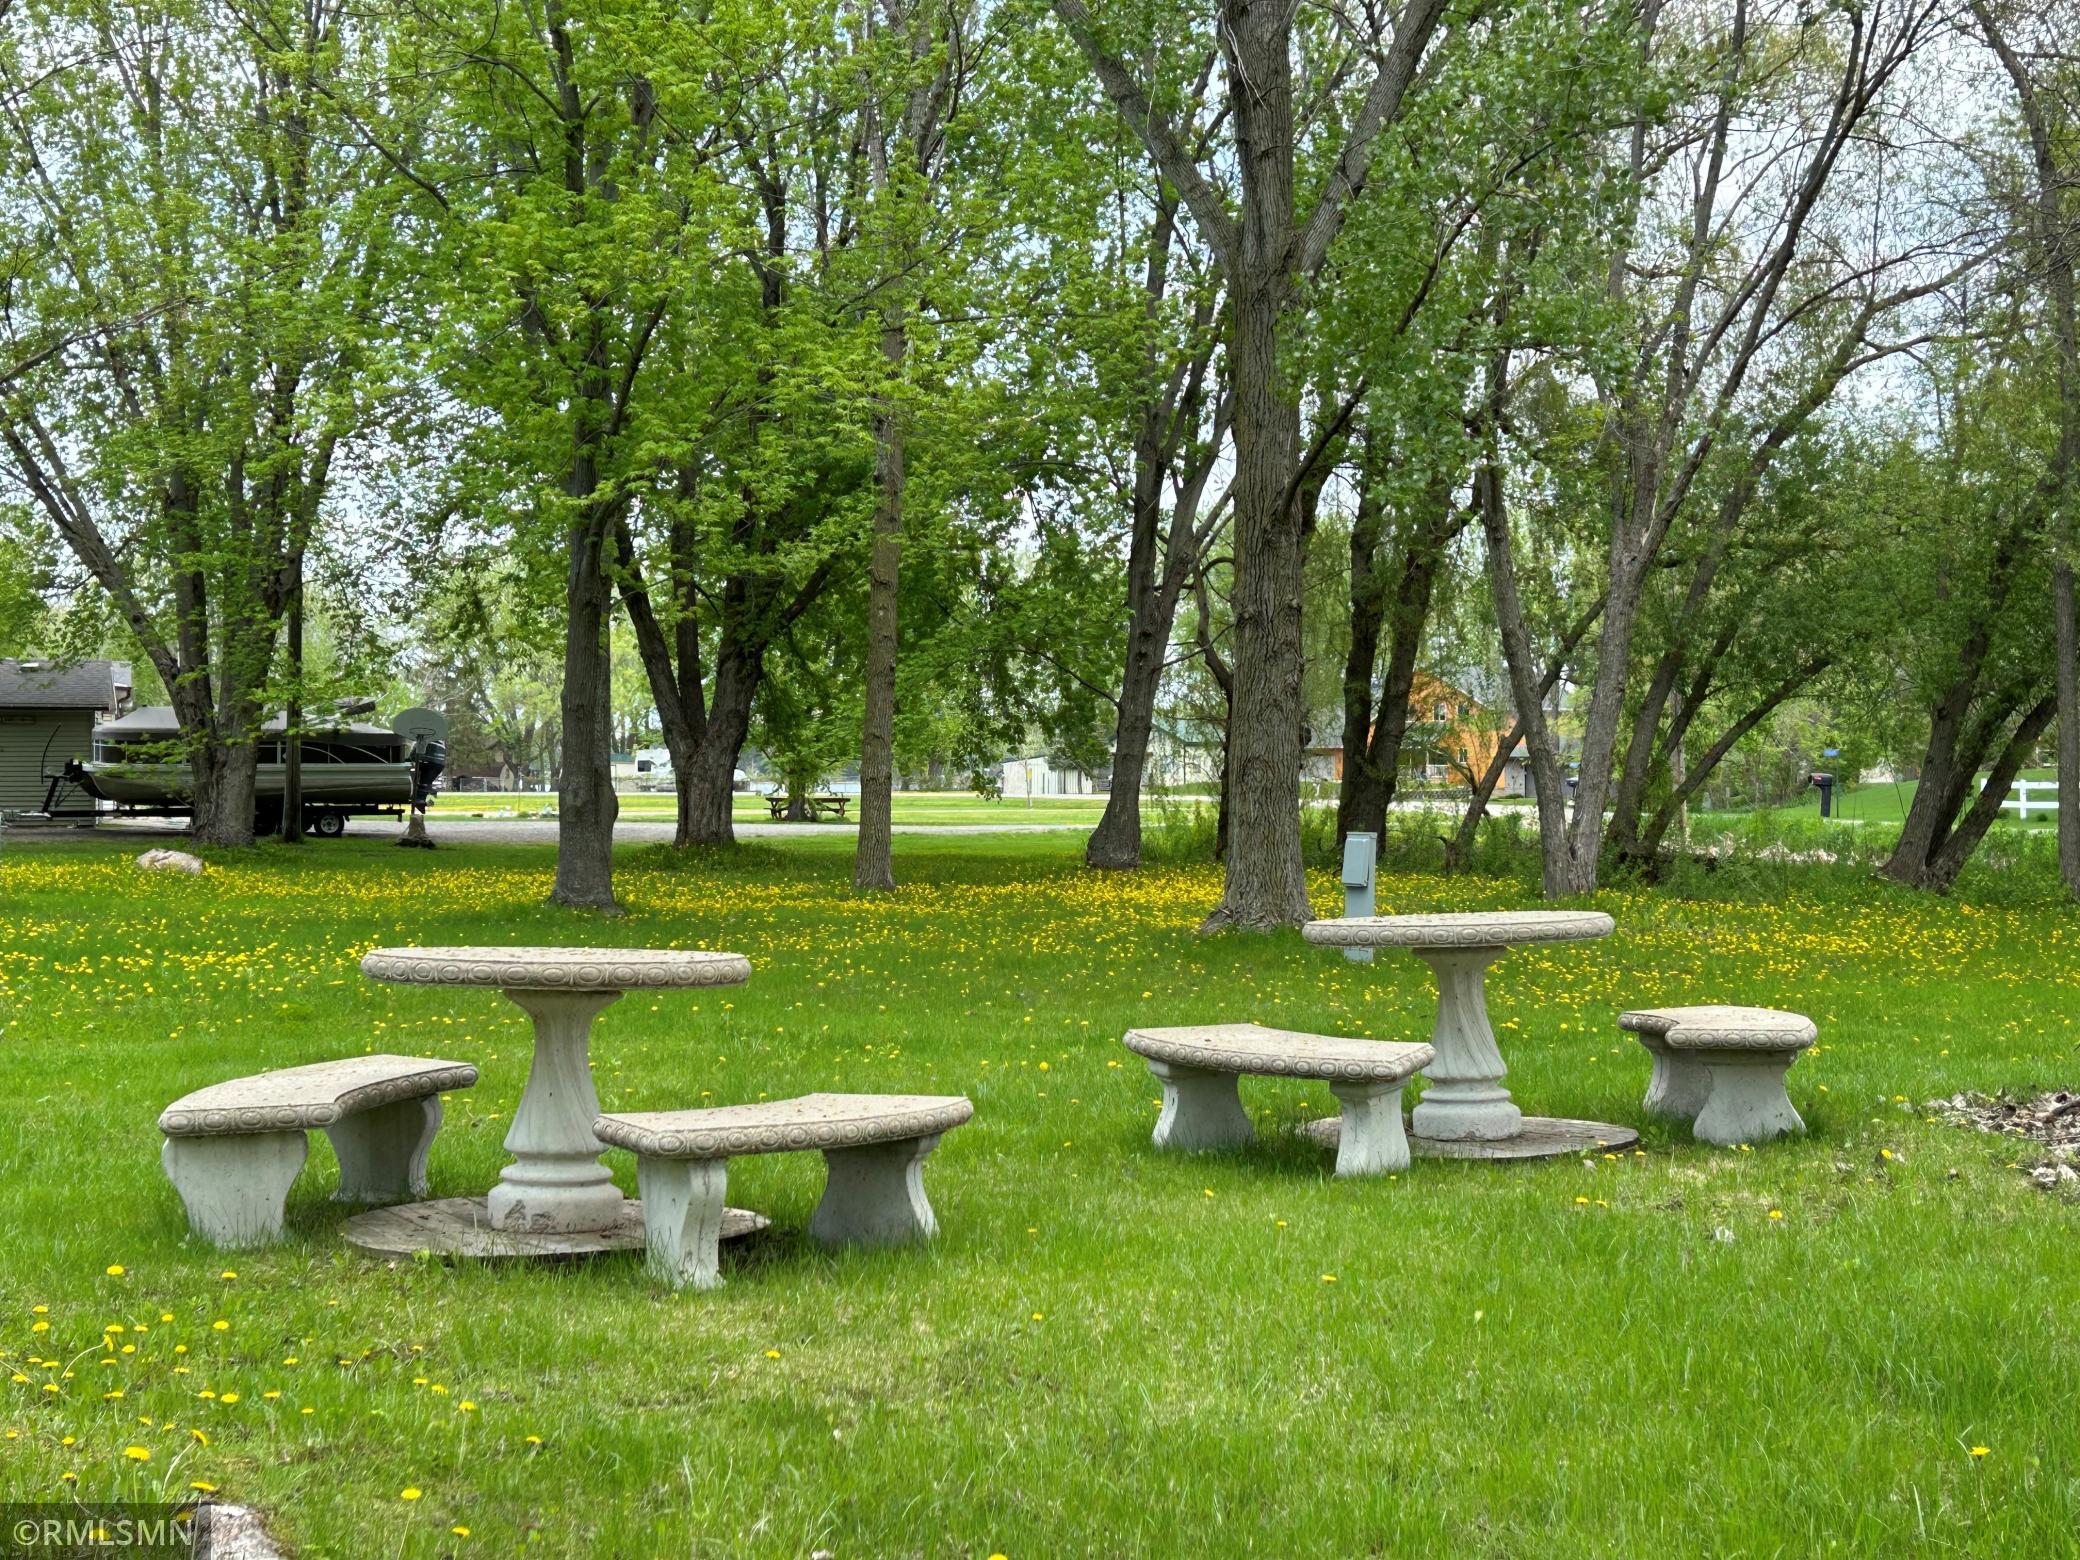 Picnic area to enjoy time gathering with family and friends. Space for a bonfire as well